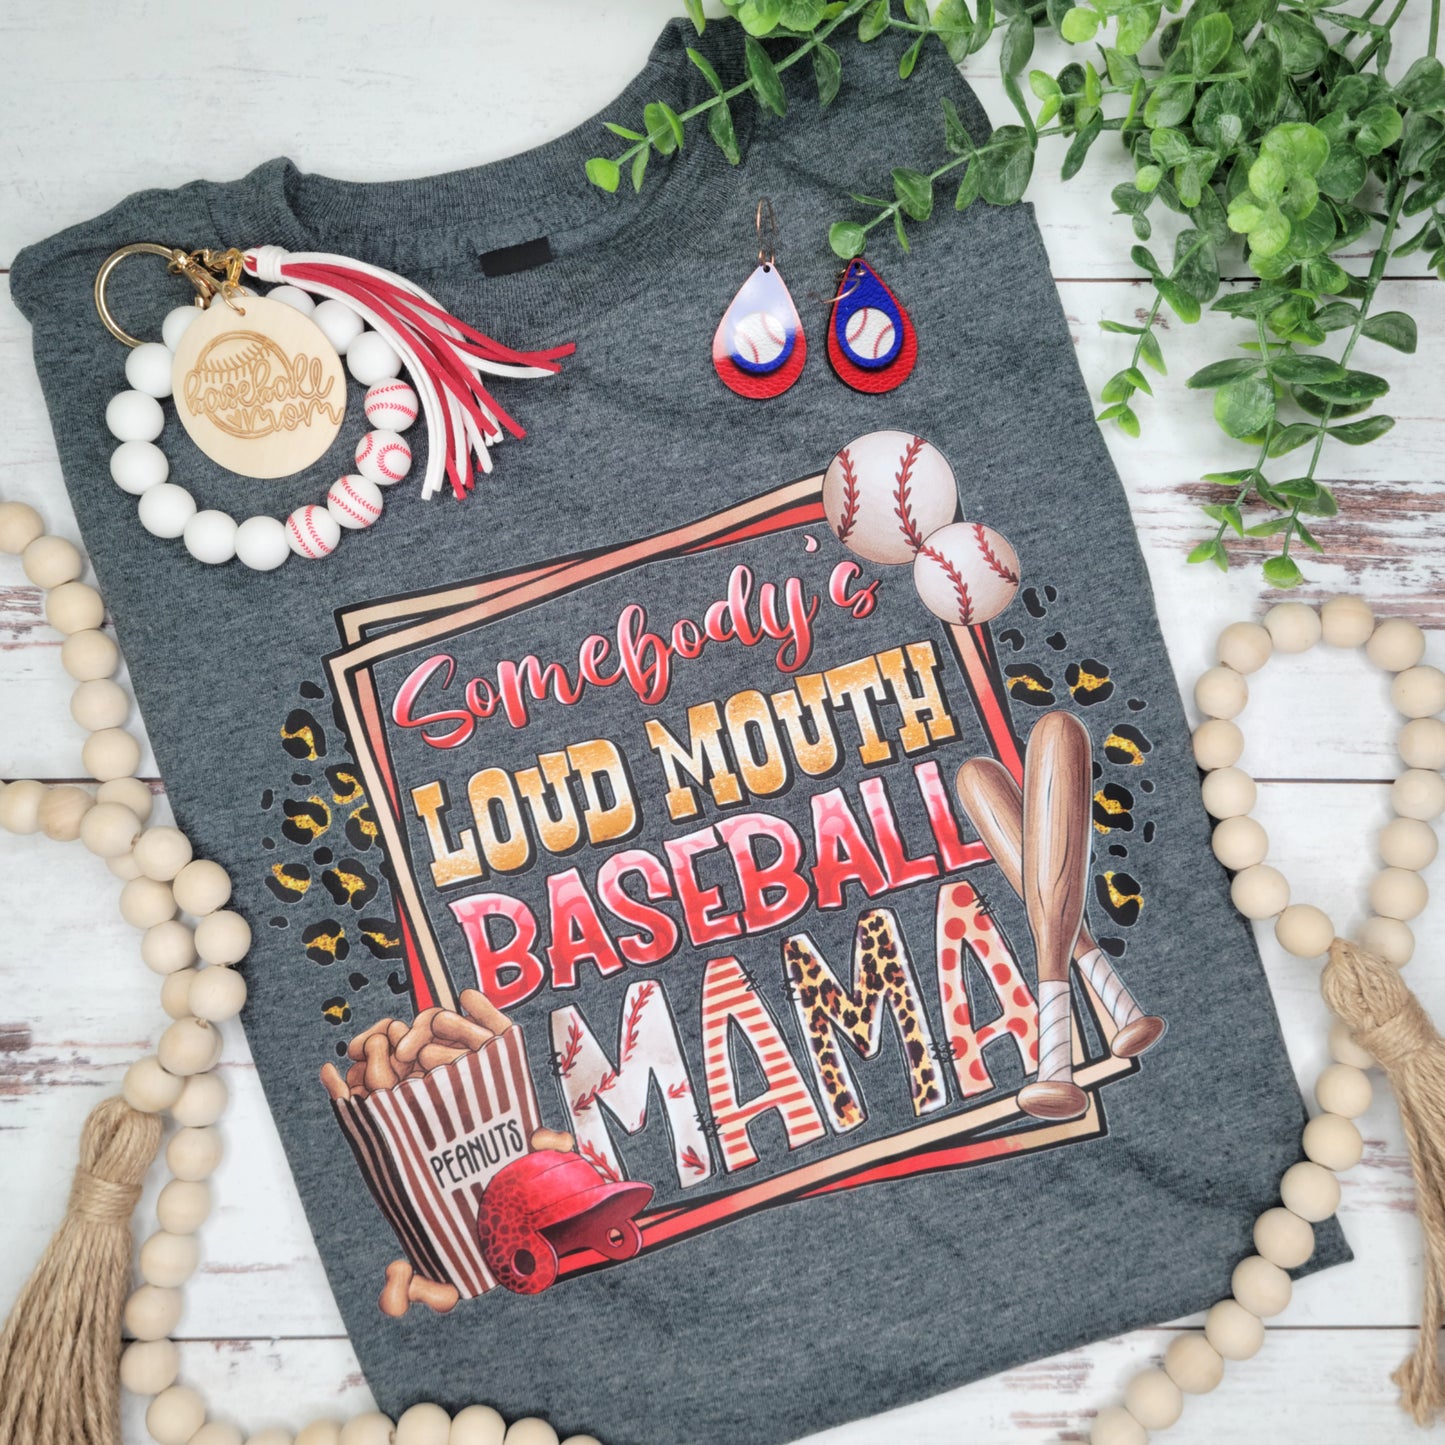 Somebody's Loud Mouth Baseball MAMA DTF Transfer Design